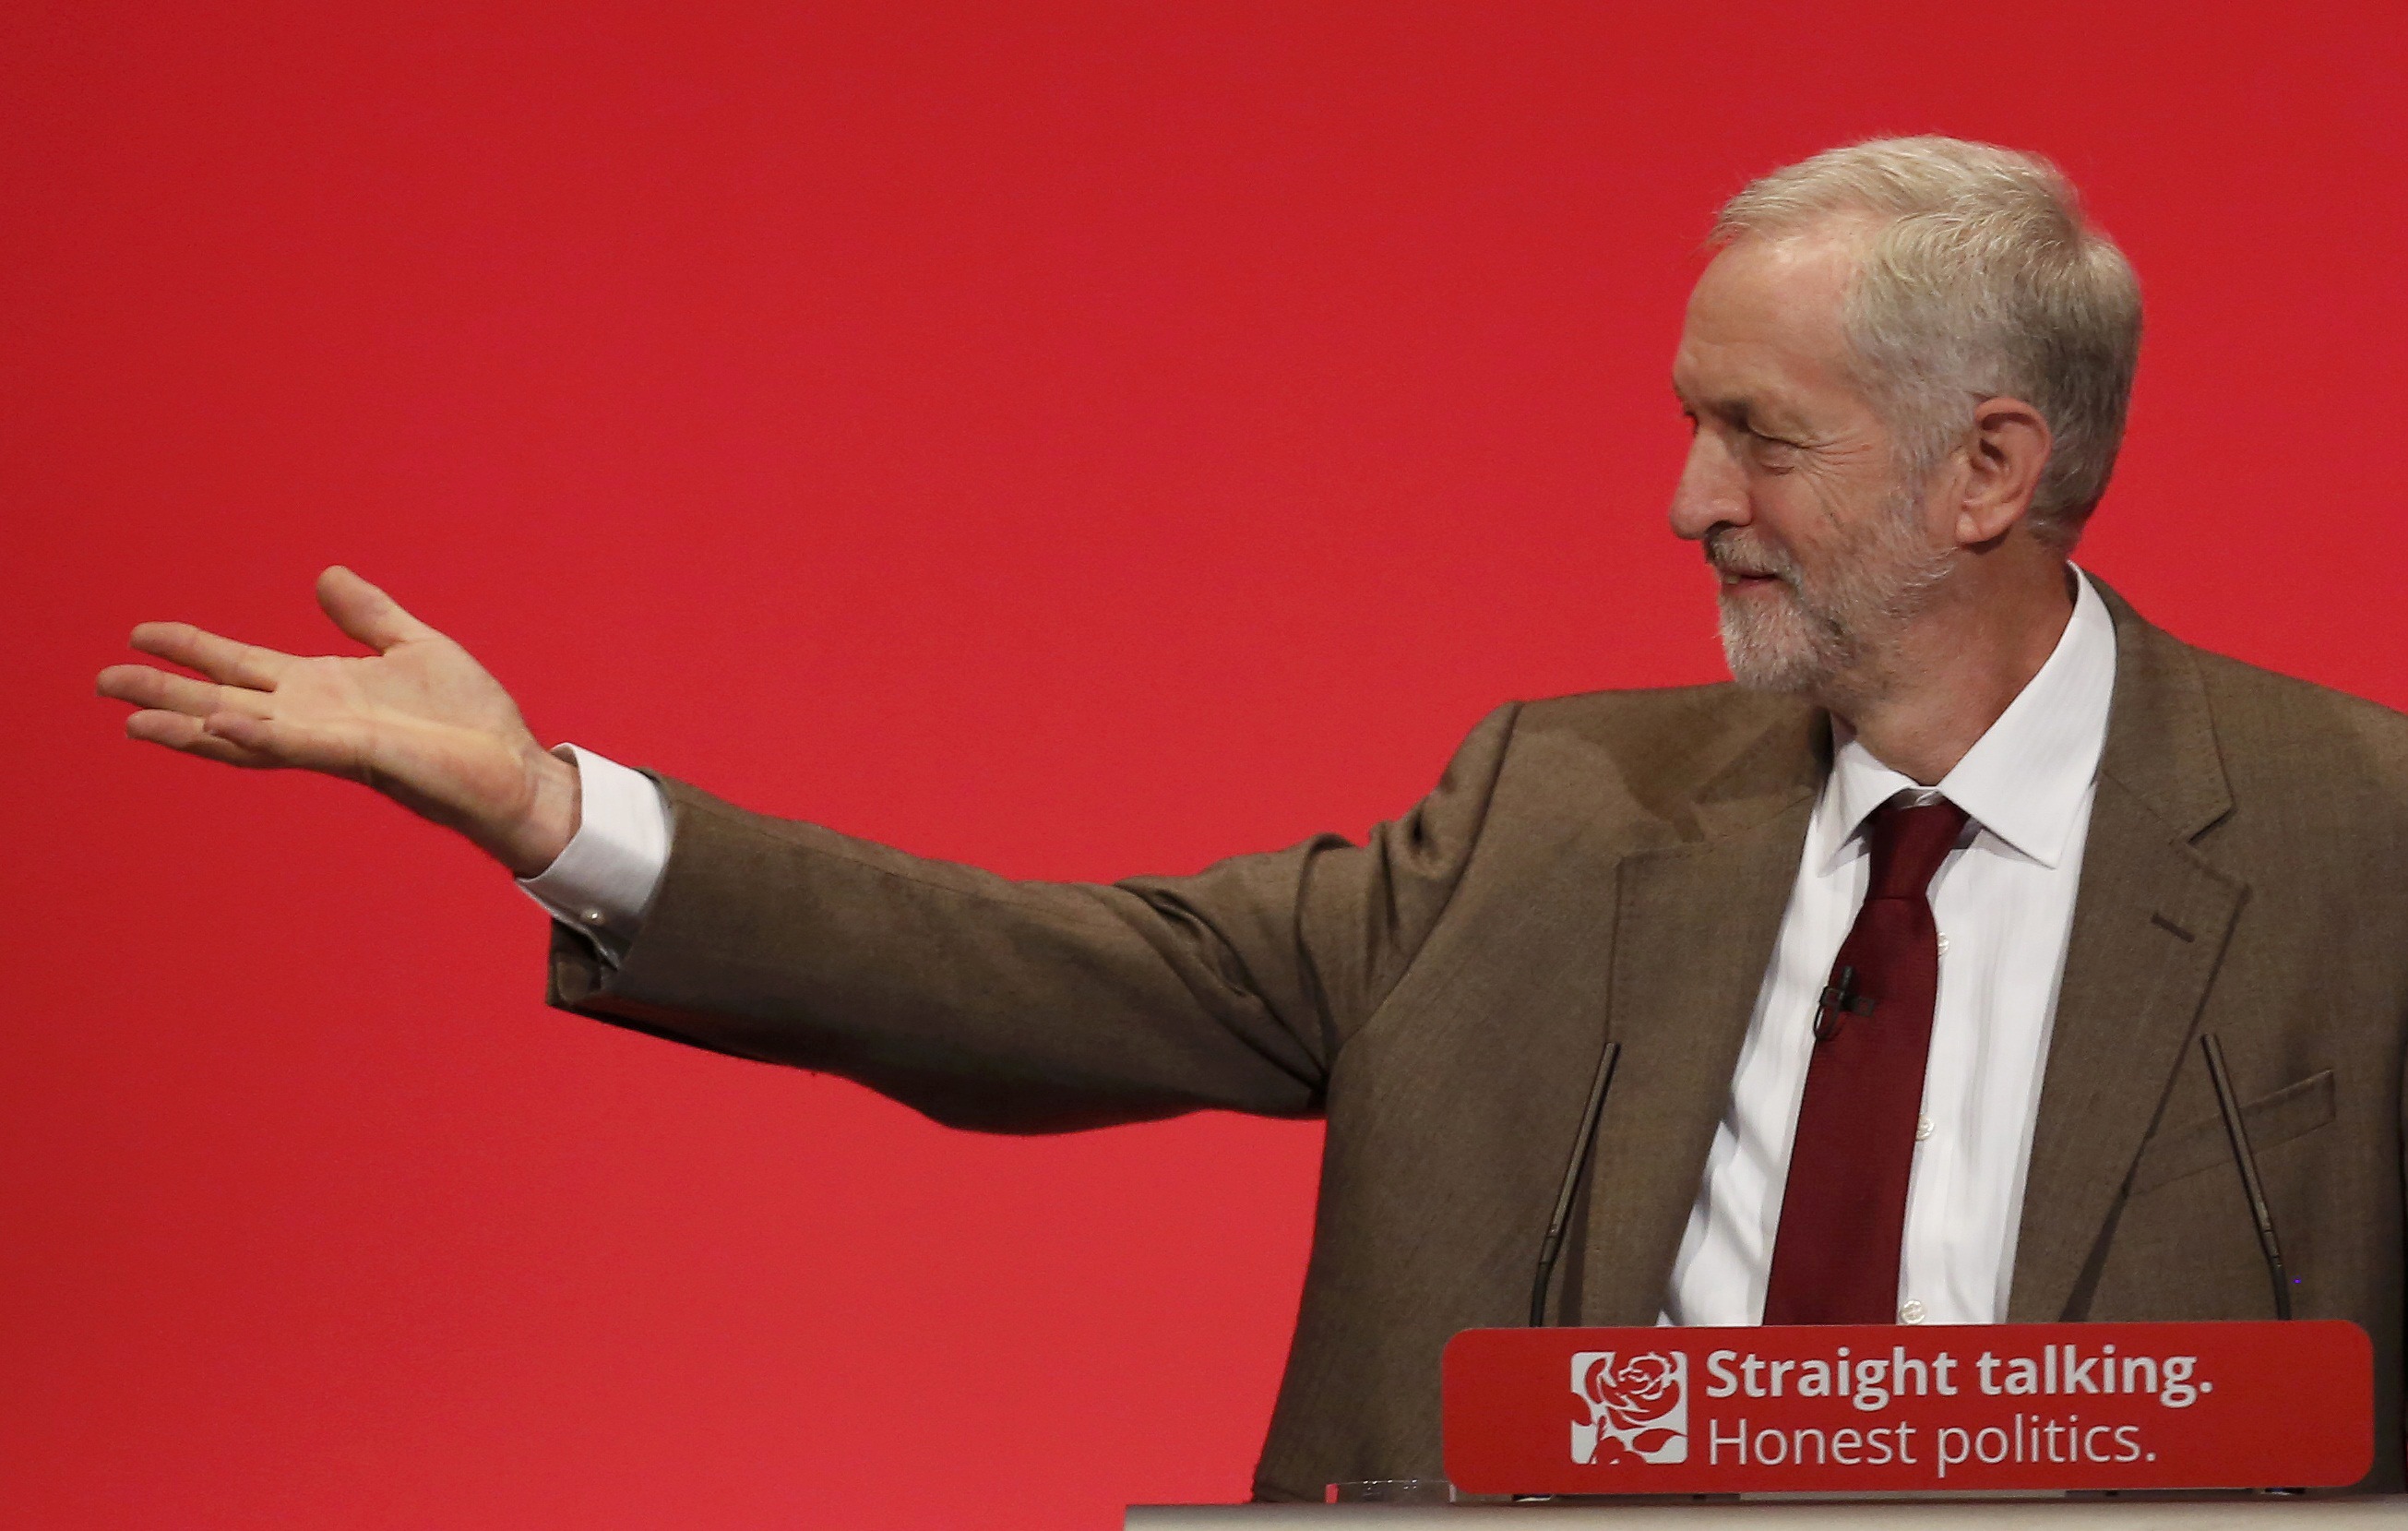 Britain's leader of the opposition Labour Party, Jeremy Corbyn, delivers his keynote speech at the party's annual conference in Brighton, Britain September 29, 2015.